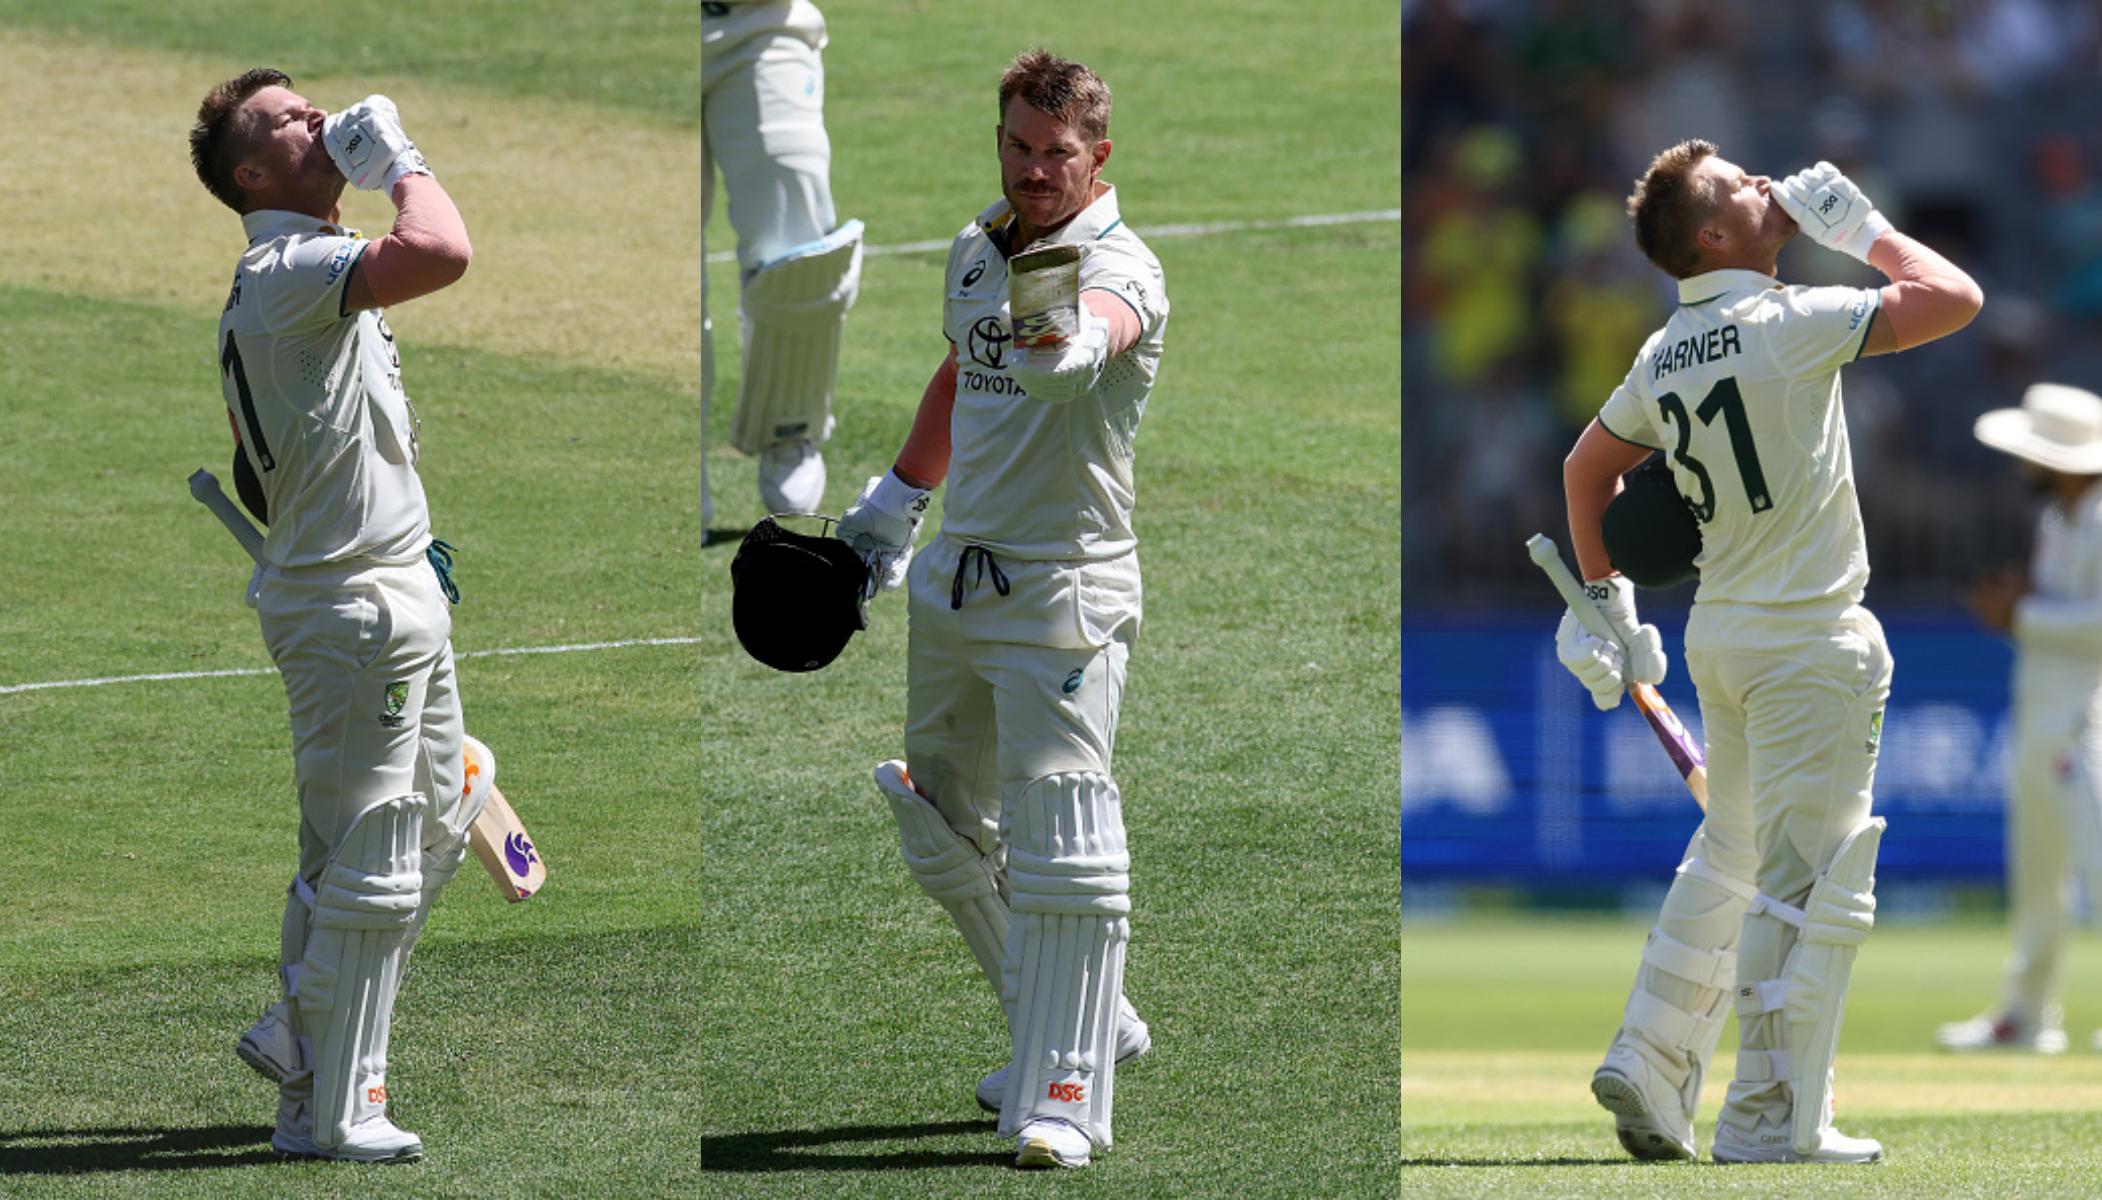 David Warner showed finger on lips gesture to slience his critcis after Perth ton | Getty